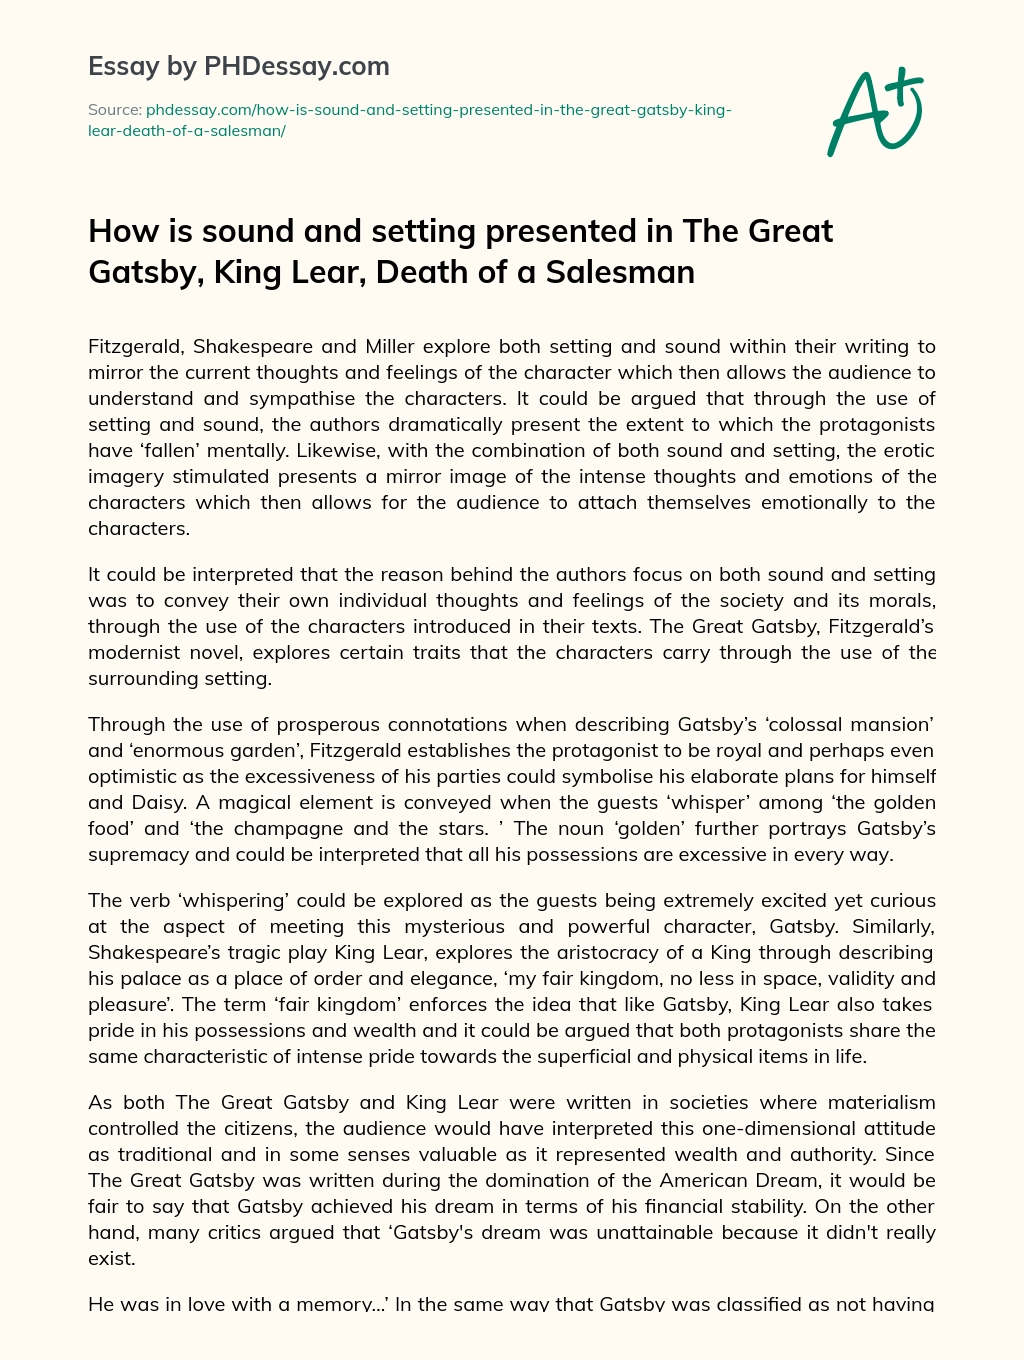 How is sound and setting presented in The Great Gatsby, King Lear, Death of a Salesman essay